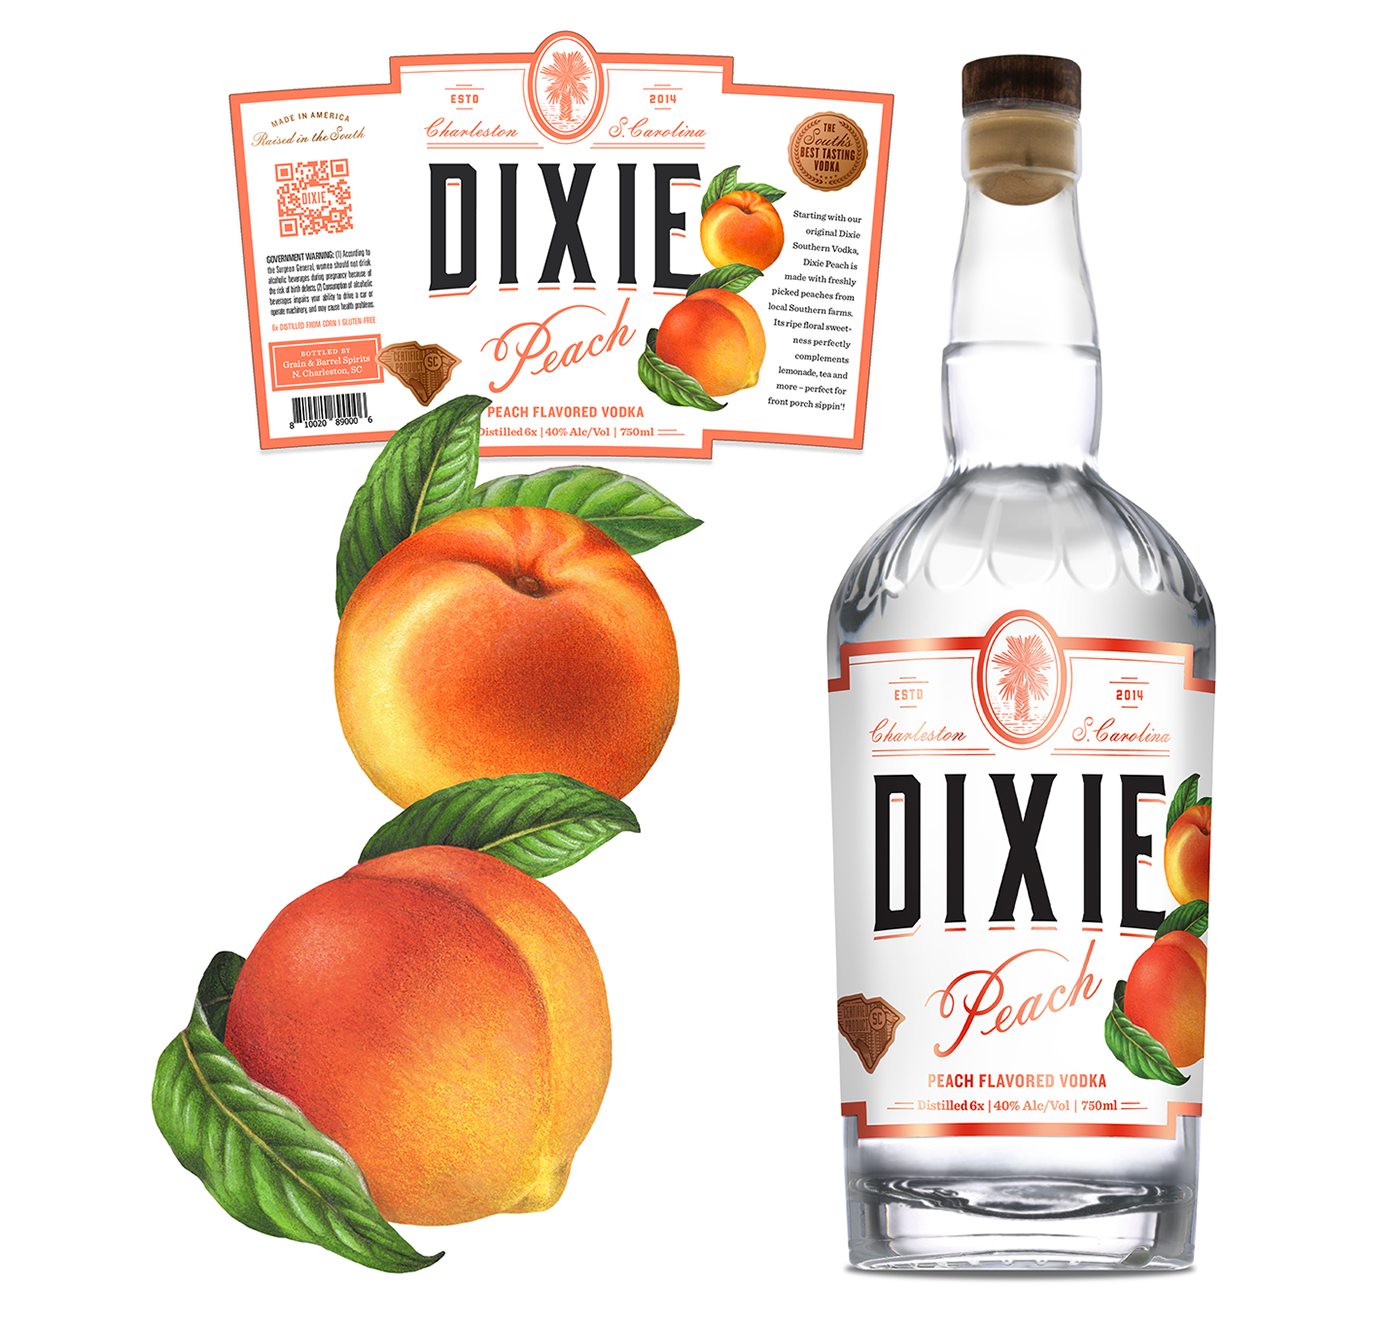 Realistic watercolor illustrations of peaches used on packaging for Dixie Peach Flavored Vodka.